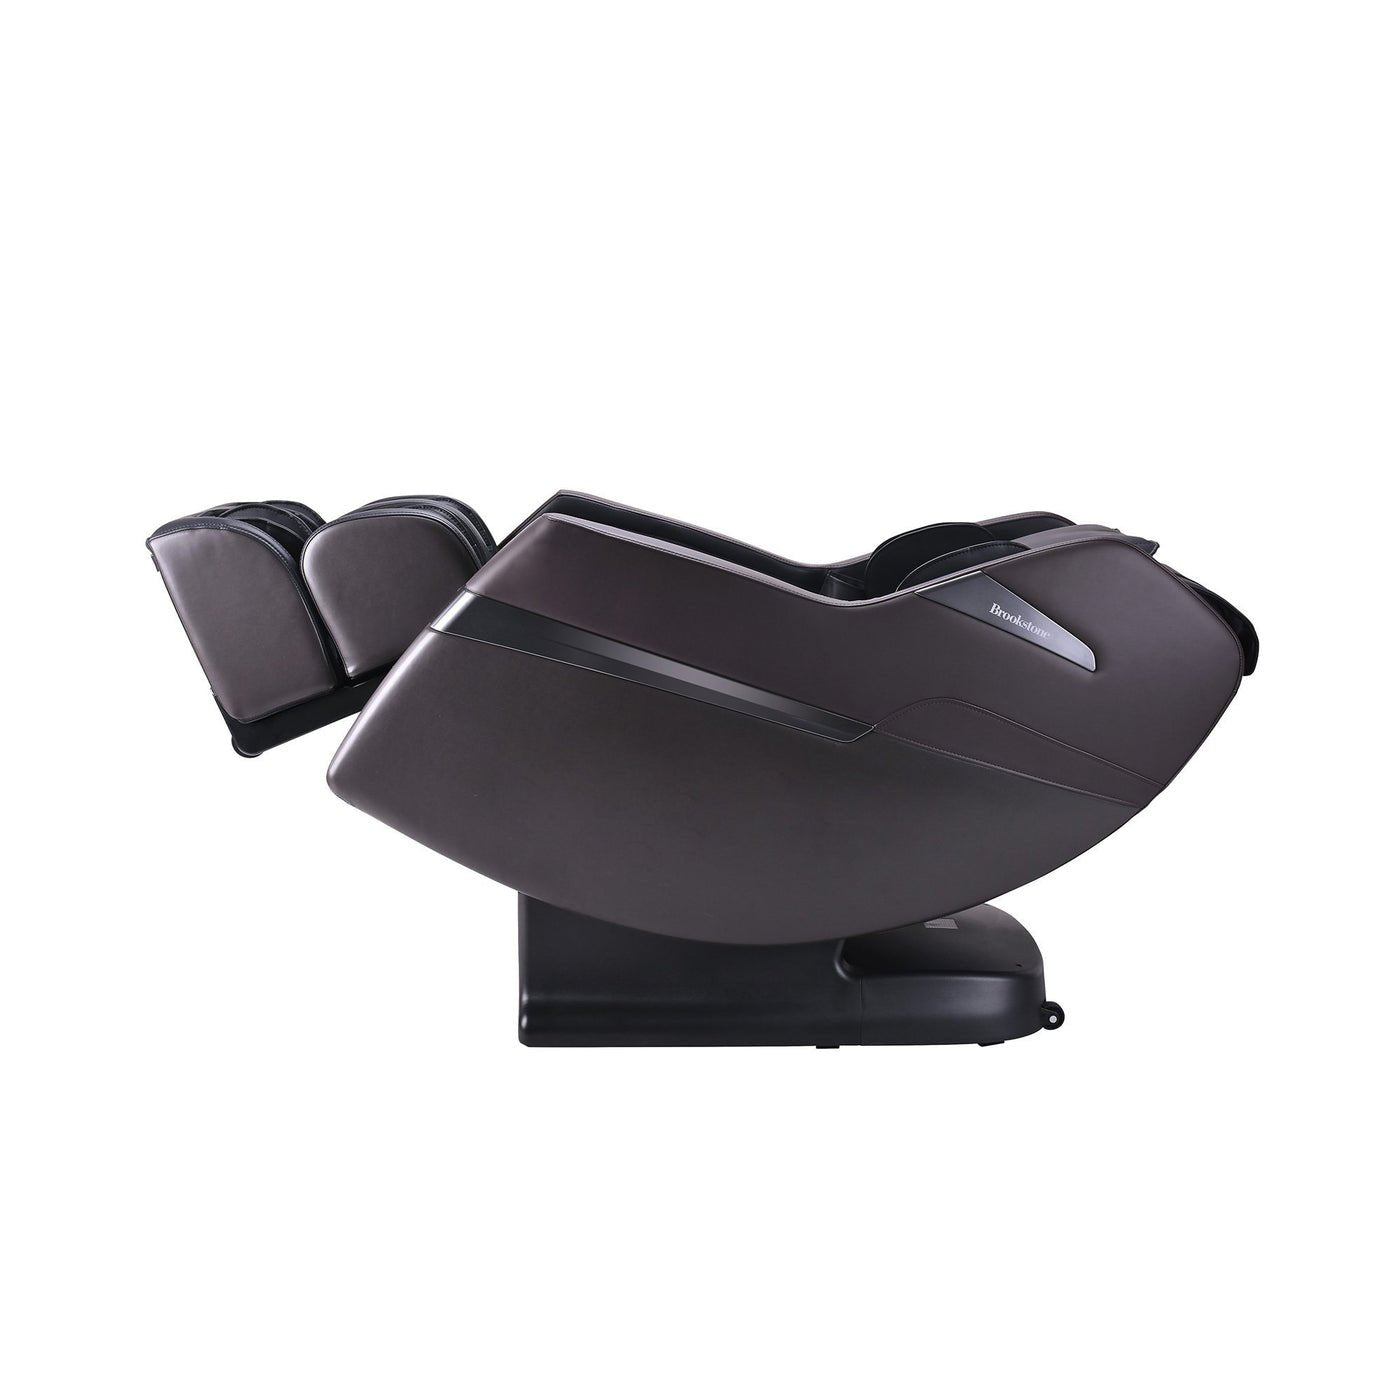 Massage Chairs for the Home - Relaxacare